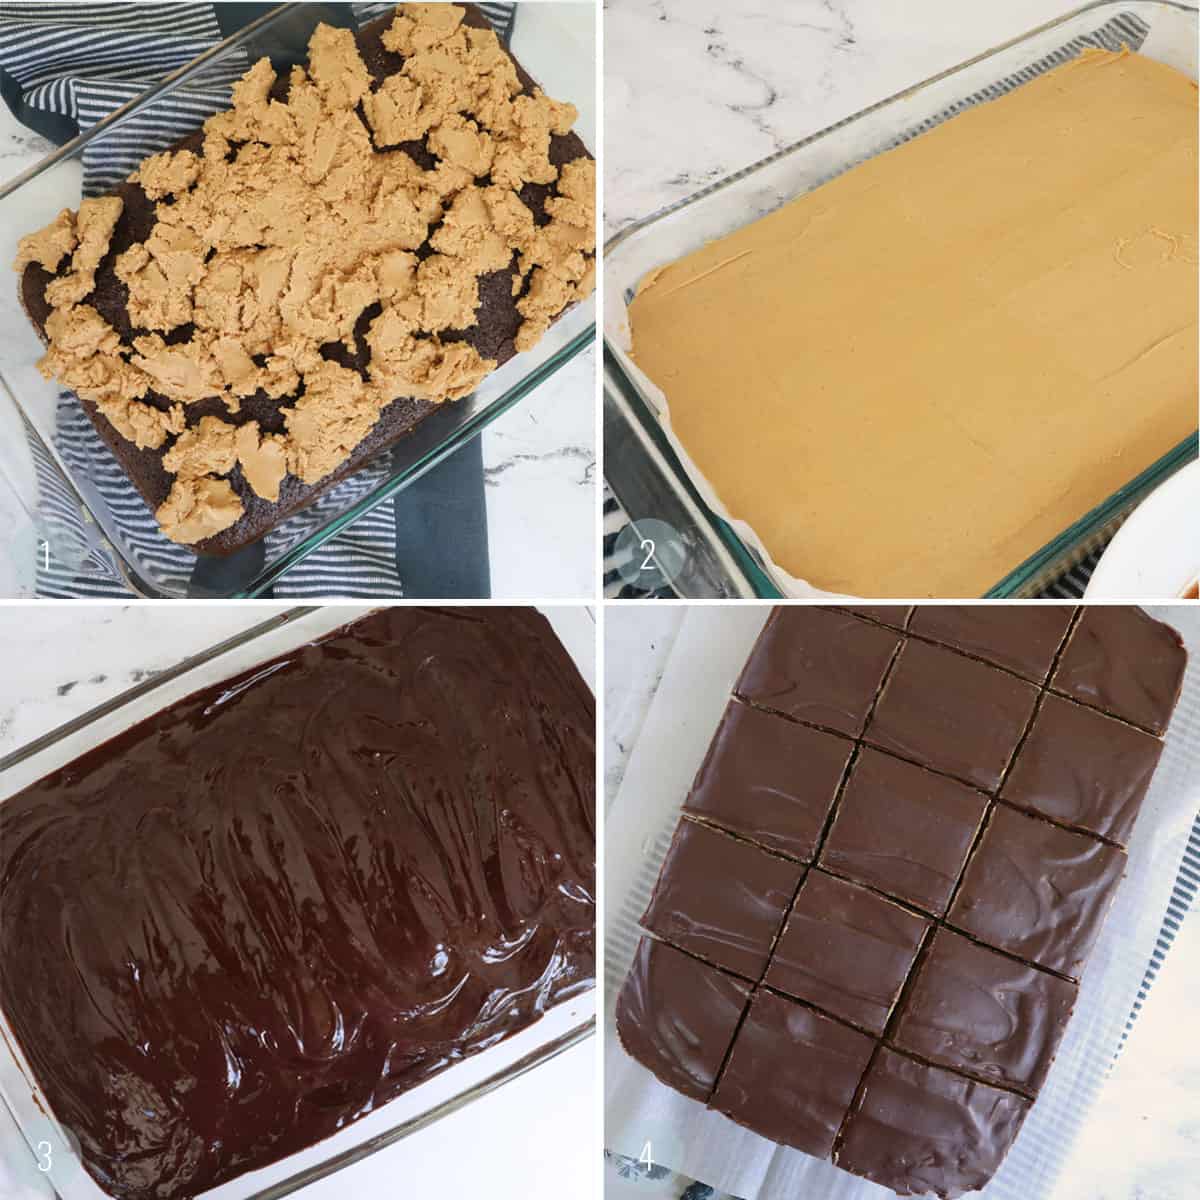 Peanut butter brownies step by step collage for how to make buckeye brownies.